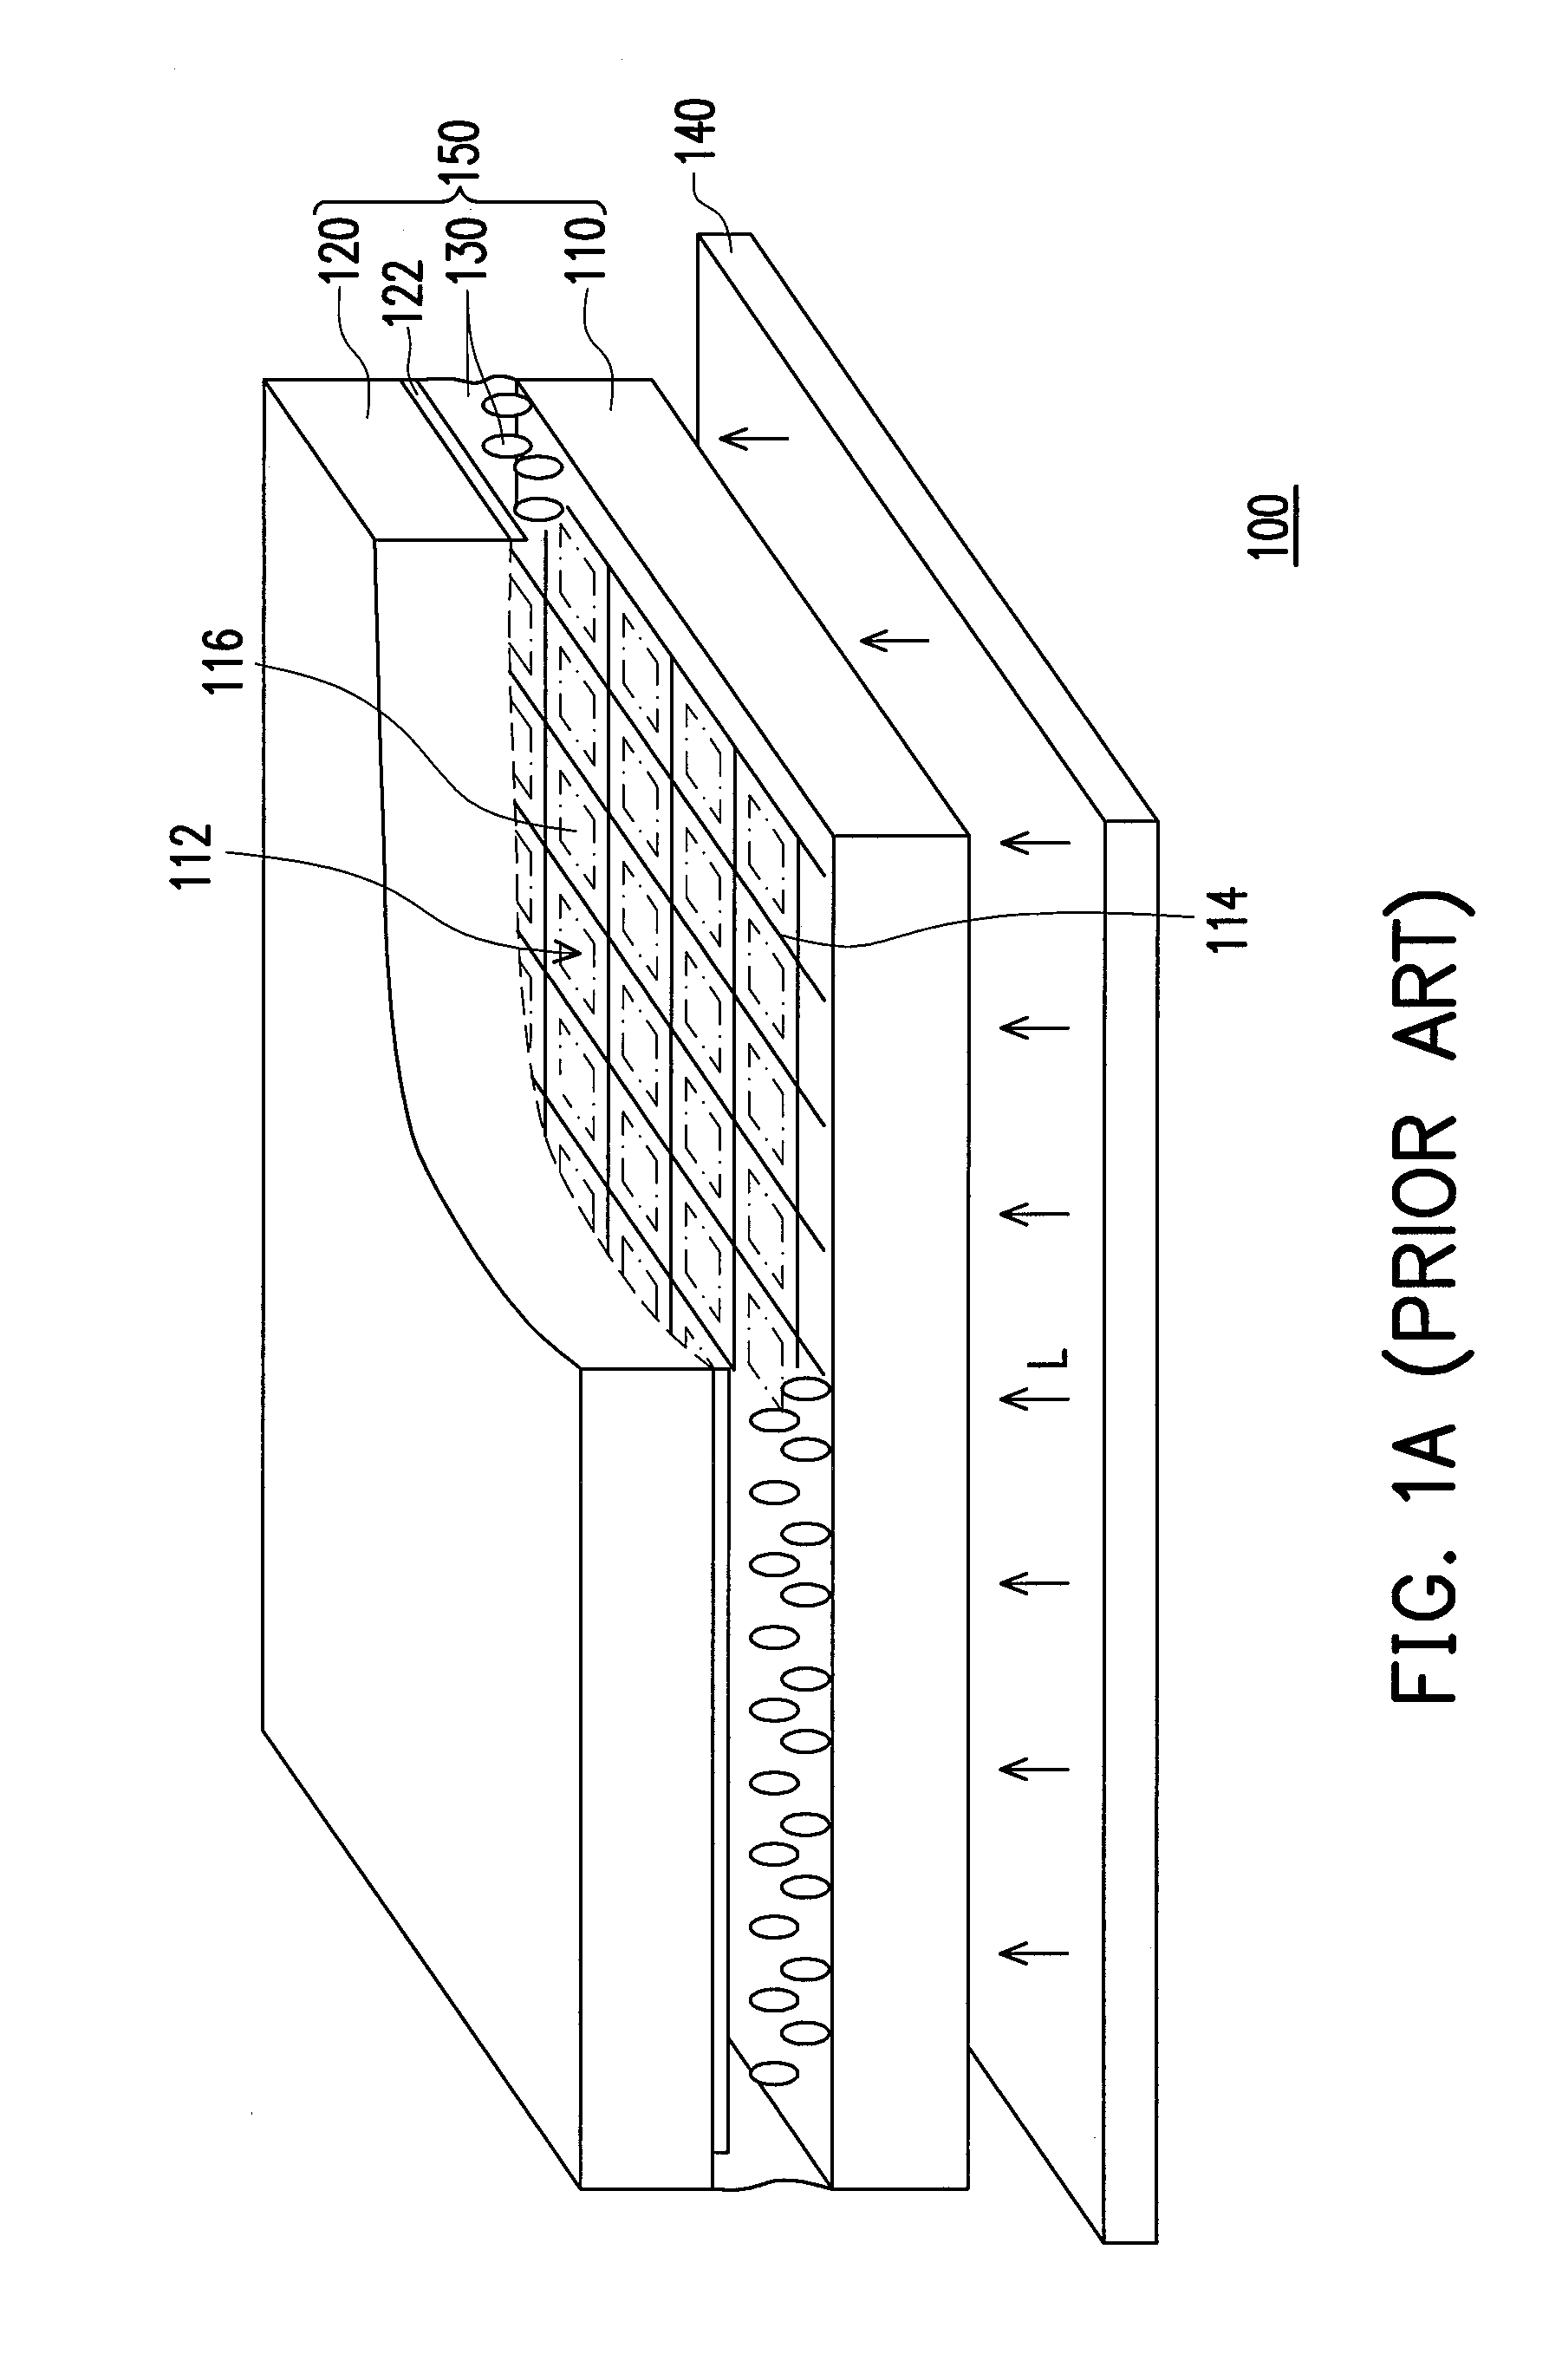 Active device array substrate